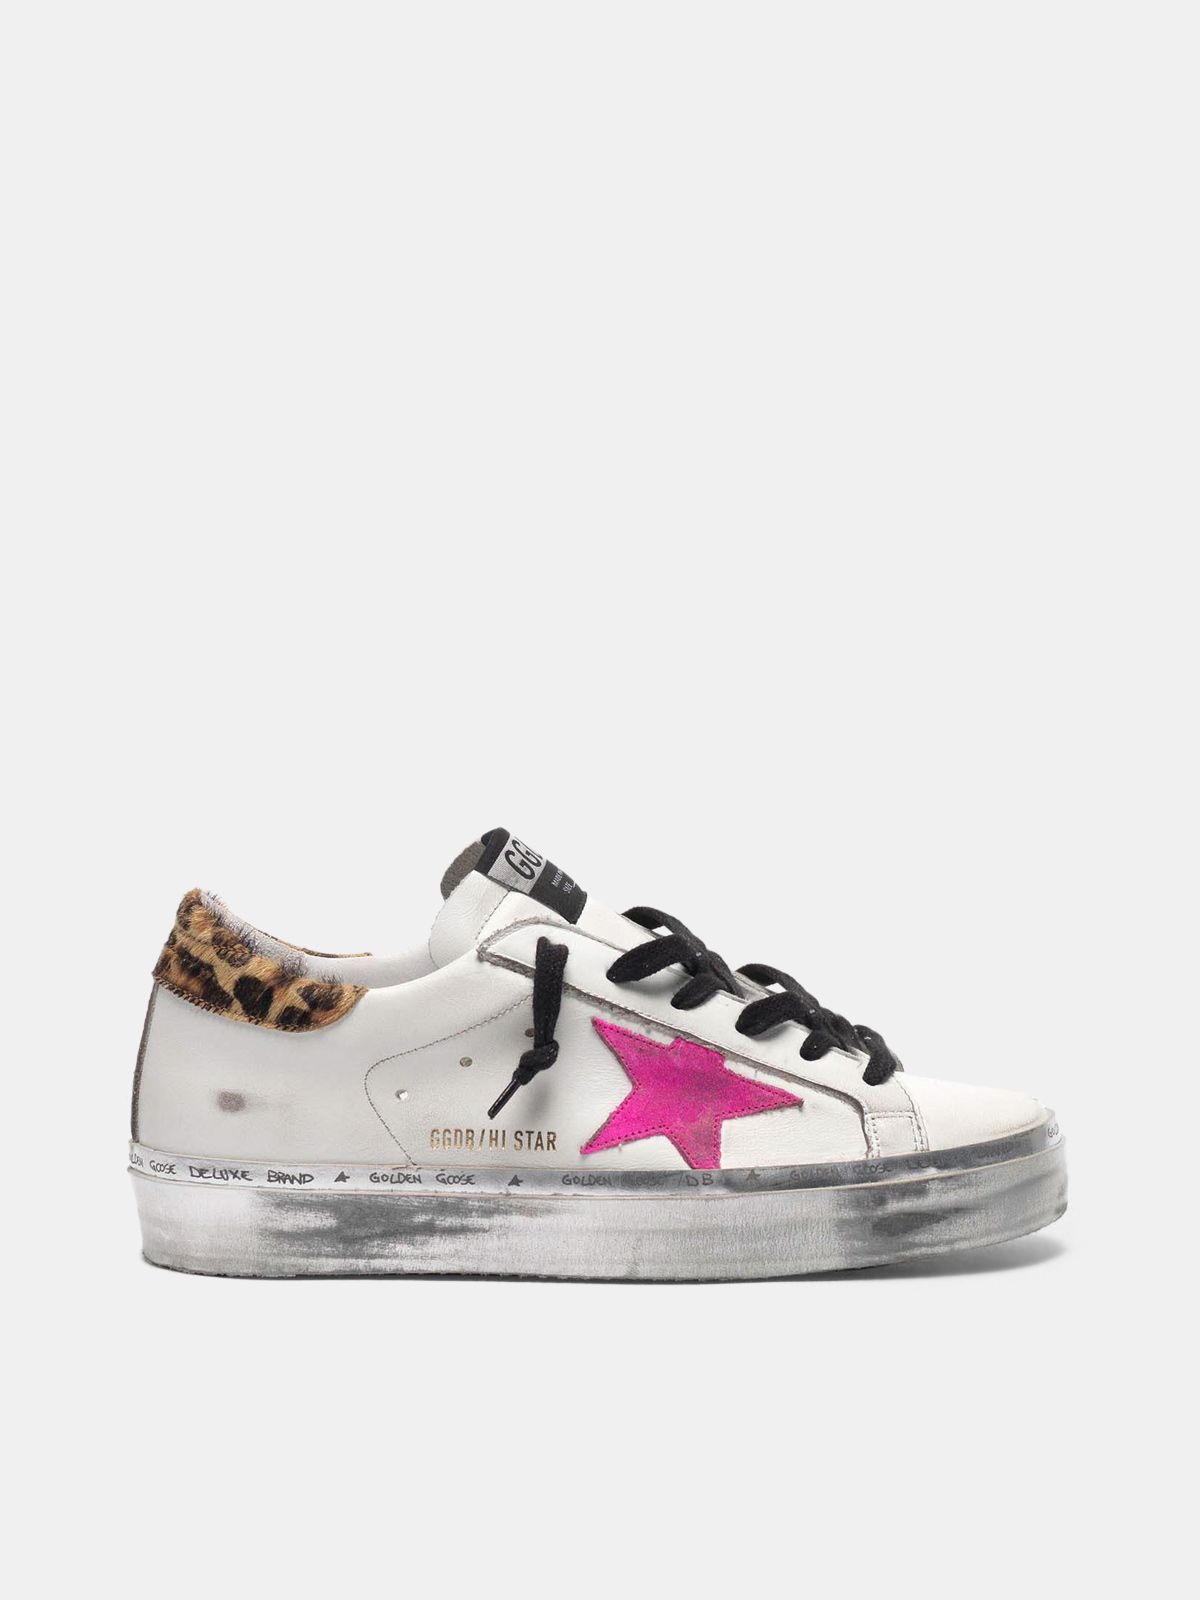 golden goose Star heel tab sneakers with star fuchsia and leopard-print Hi